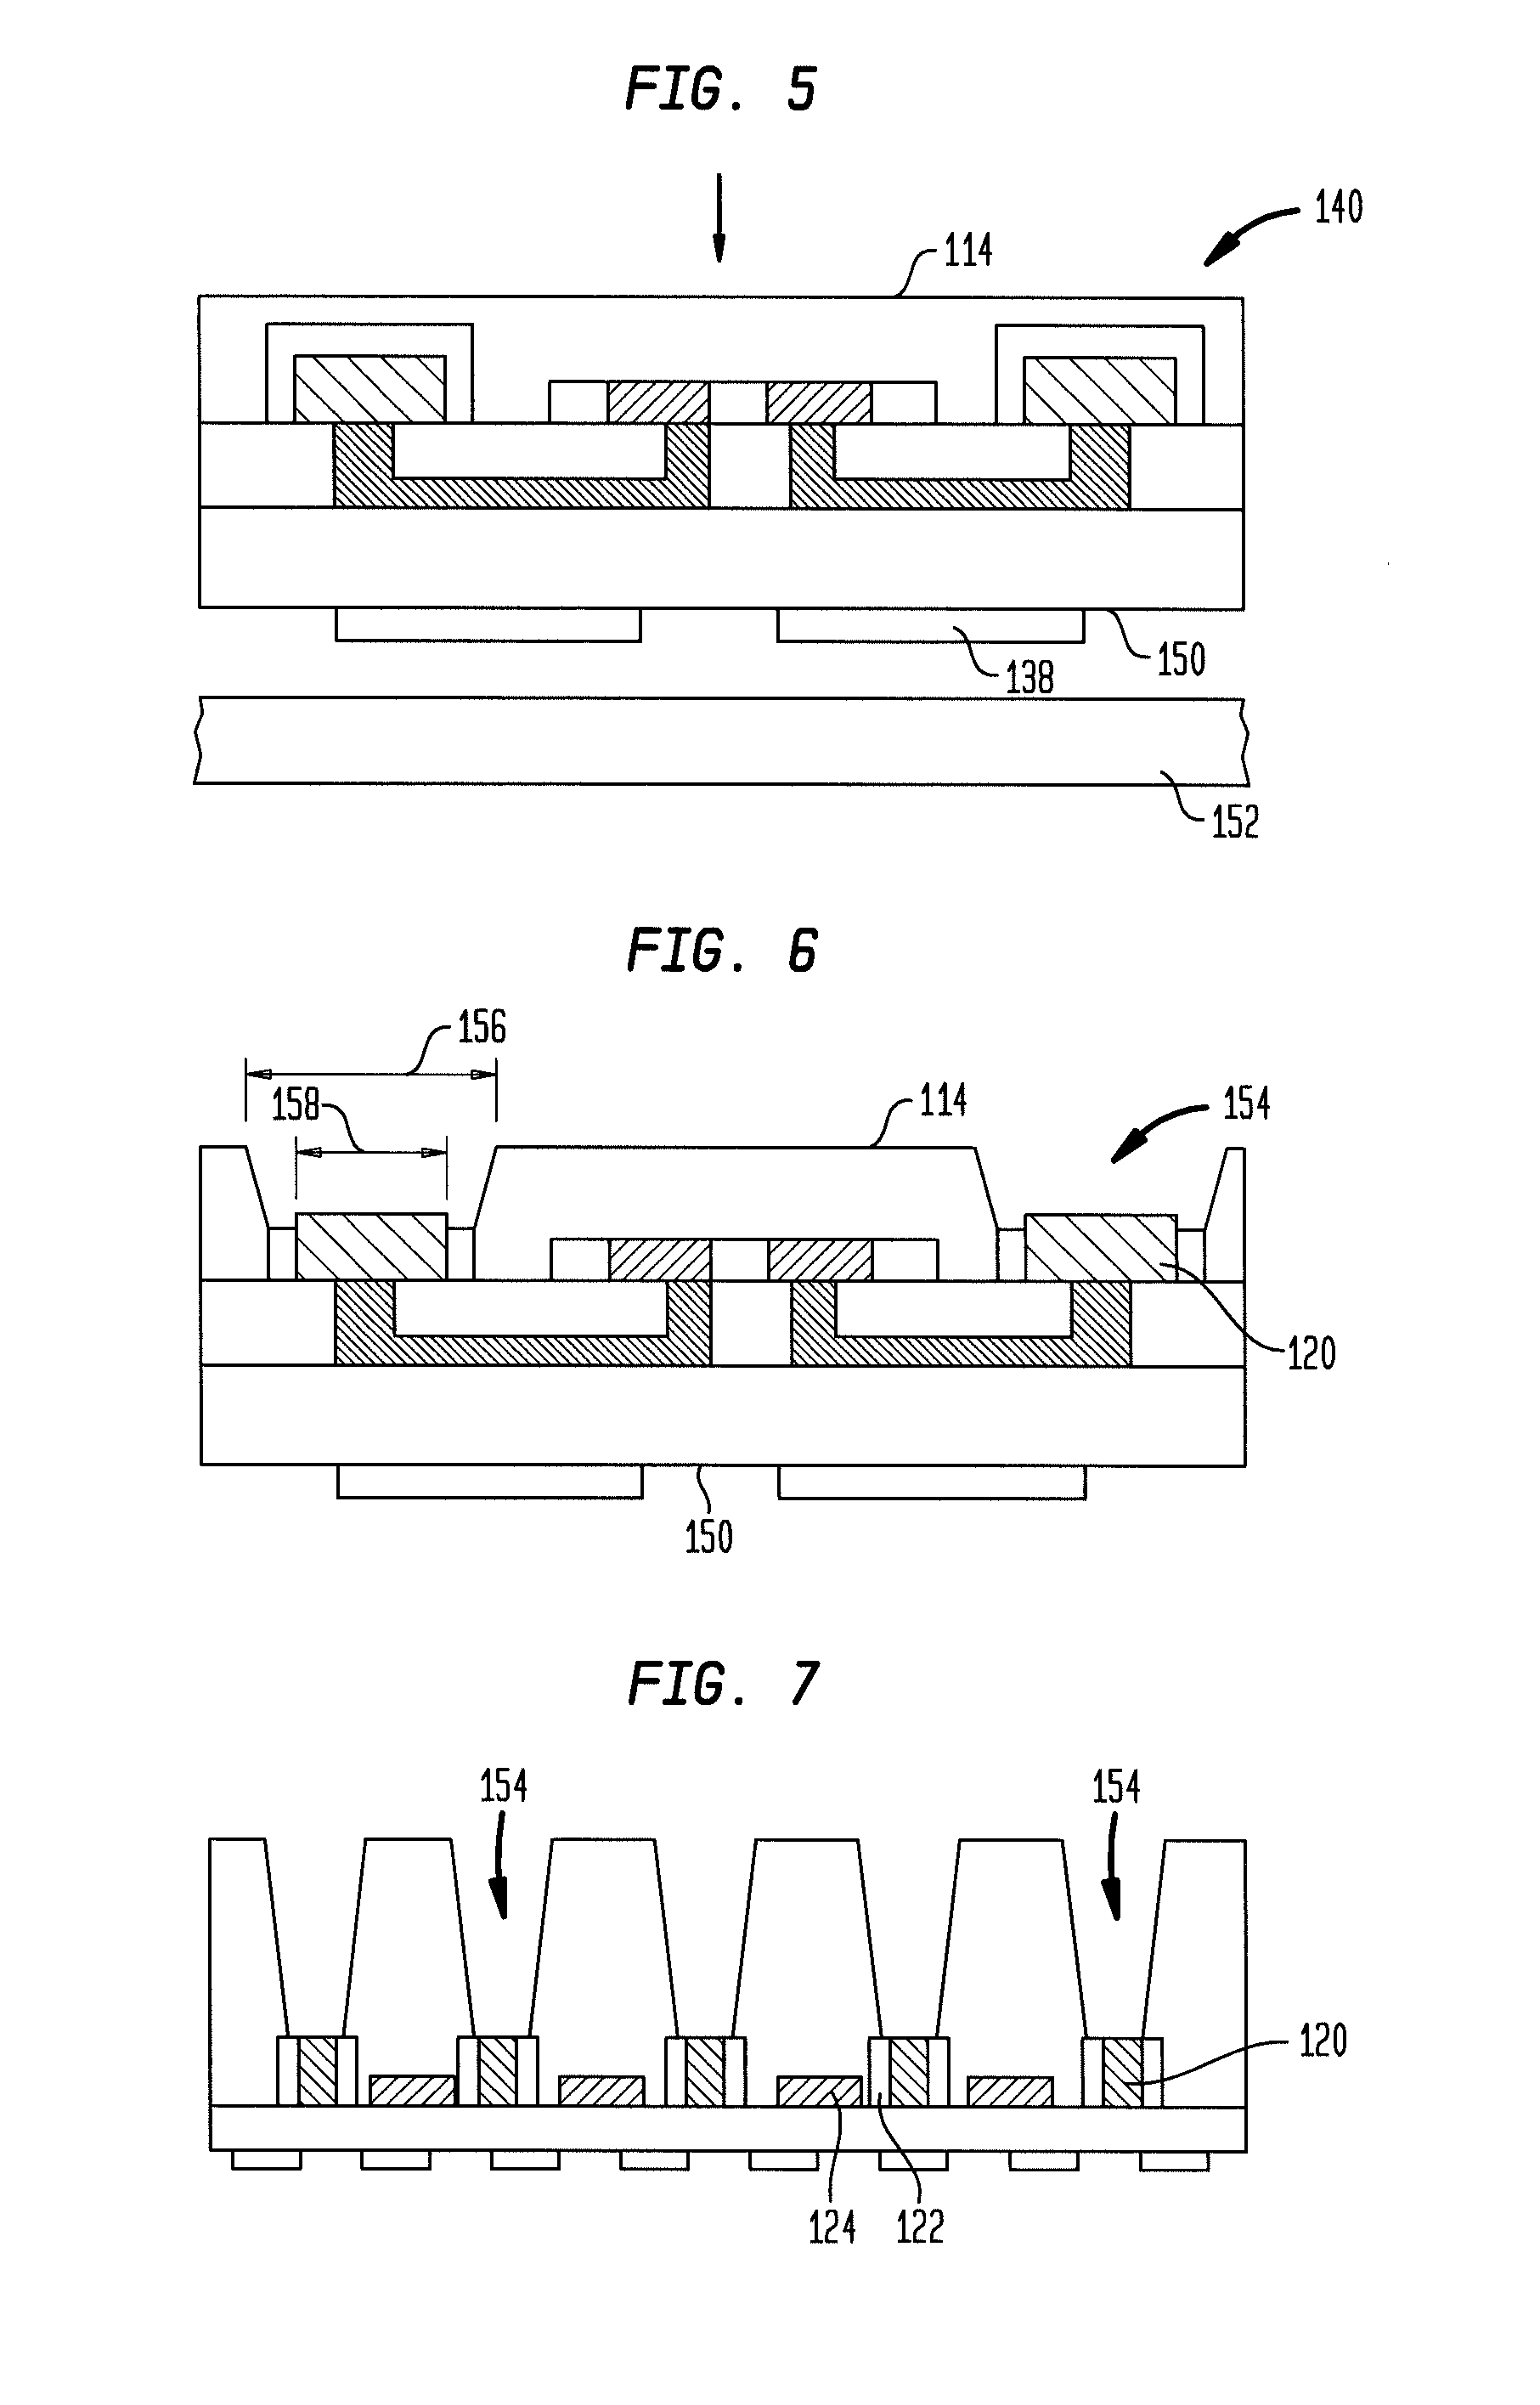 Microelectronic elements with rear contacts connected with via first or via middle structures